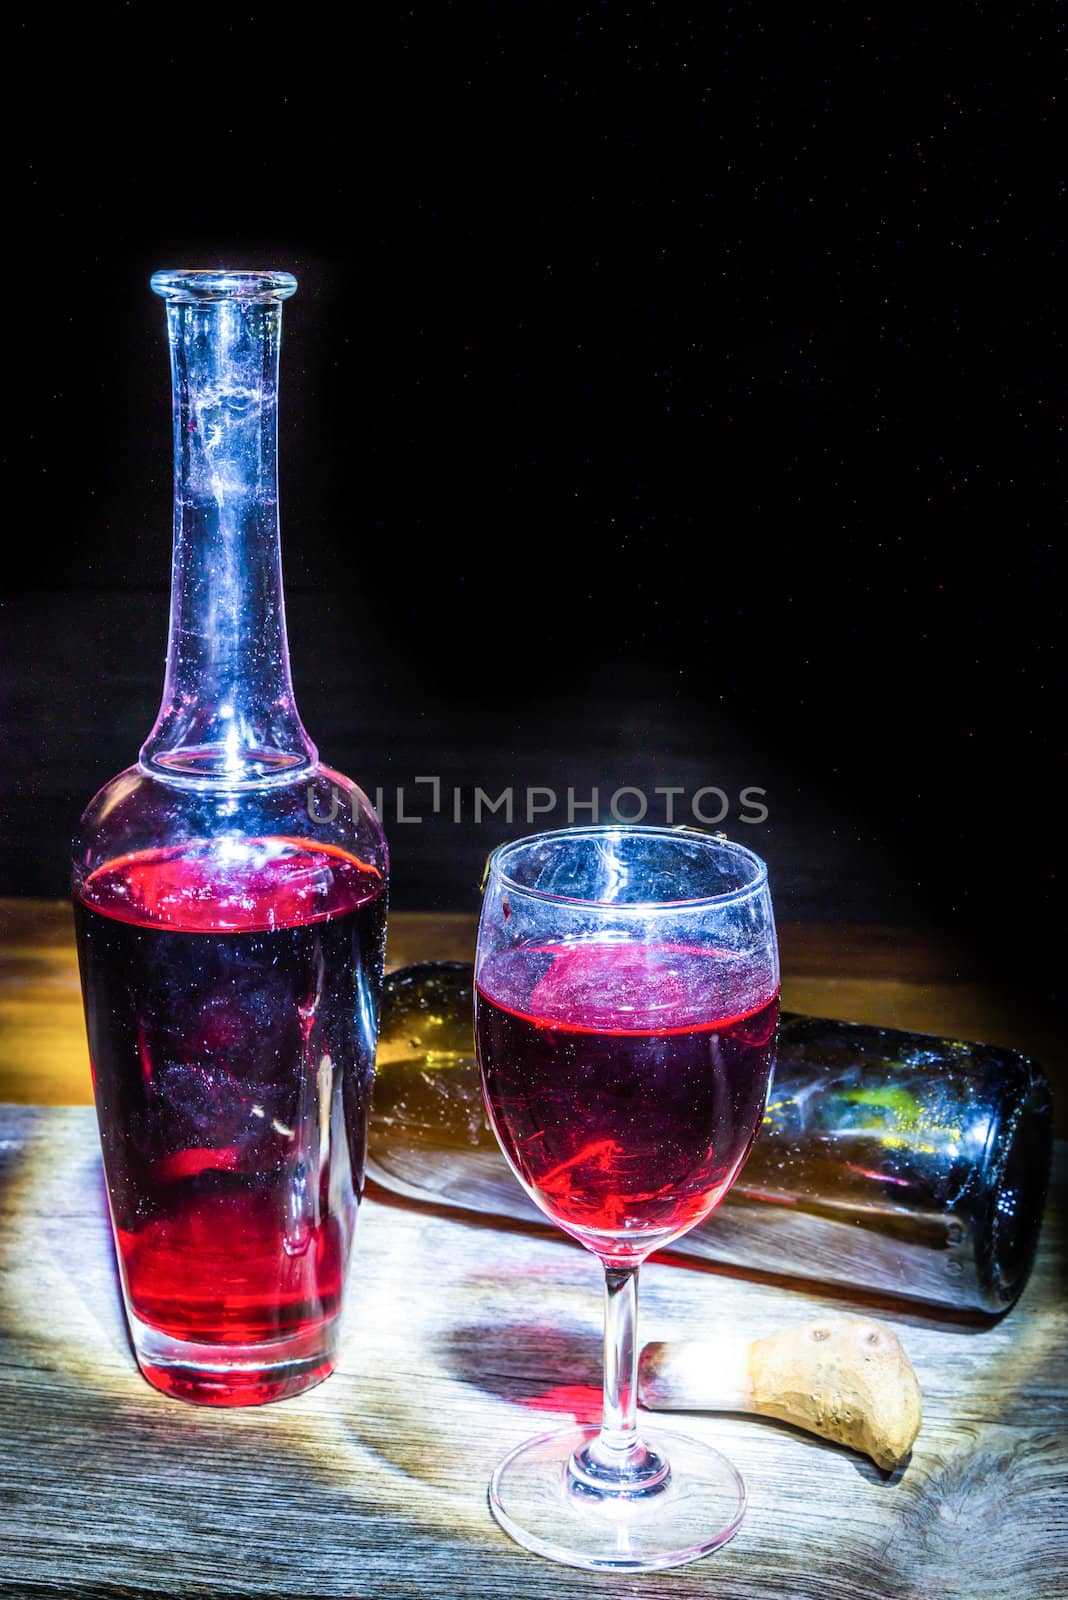 still life Wine glass and Bottle on a wooden background